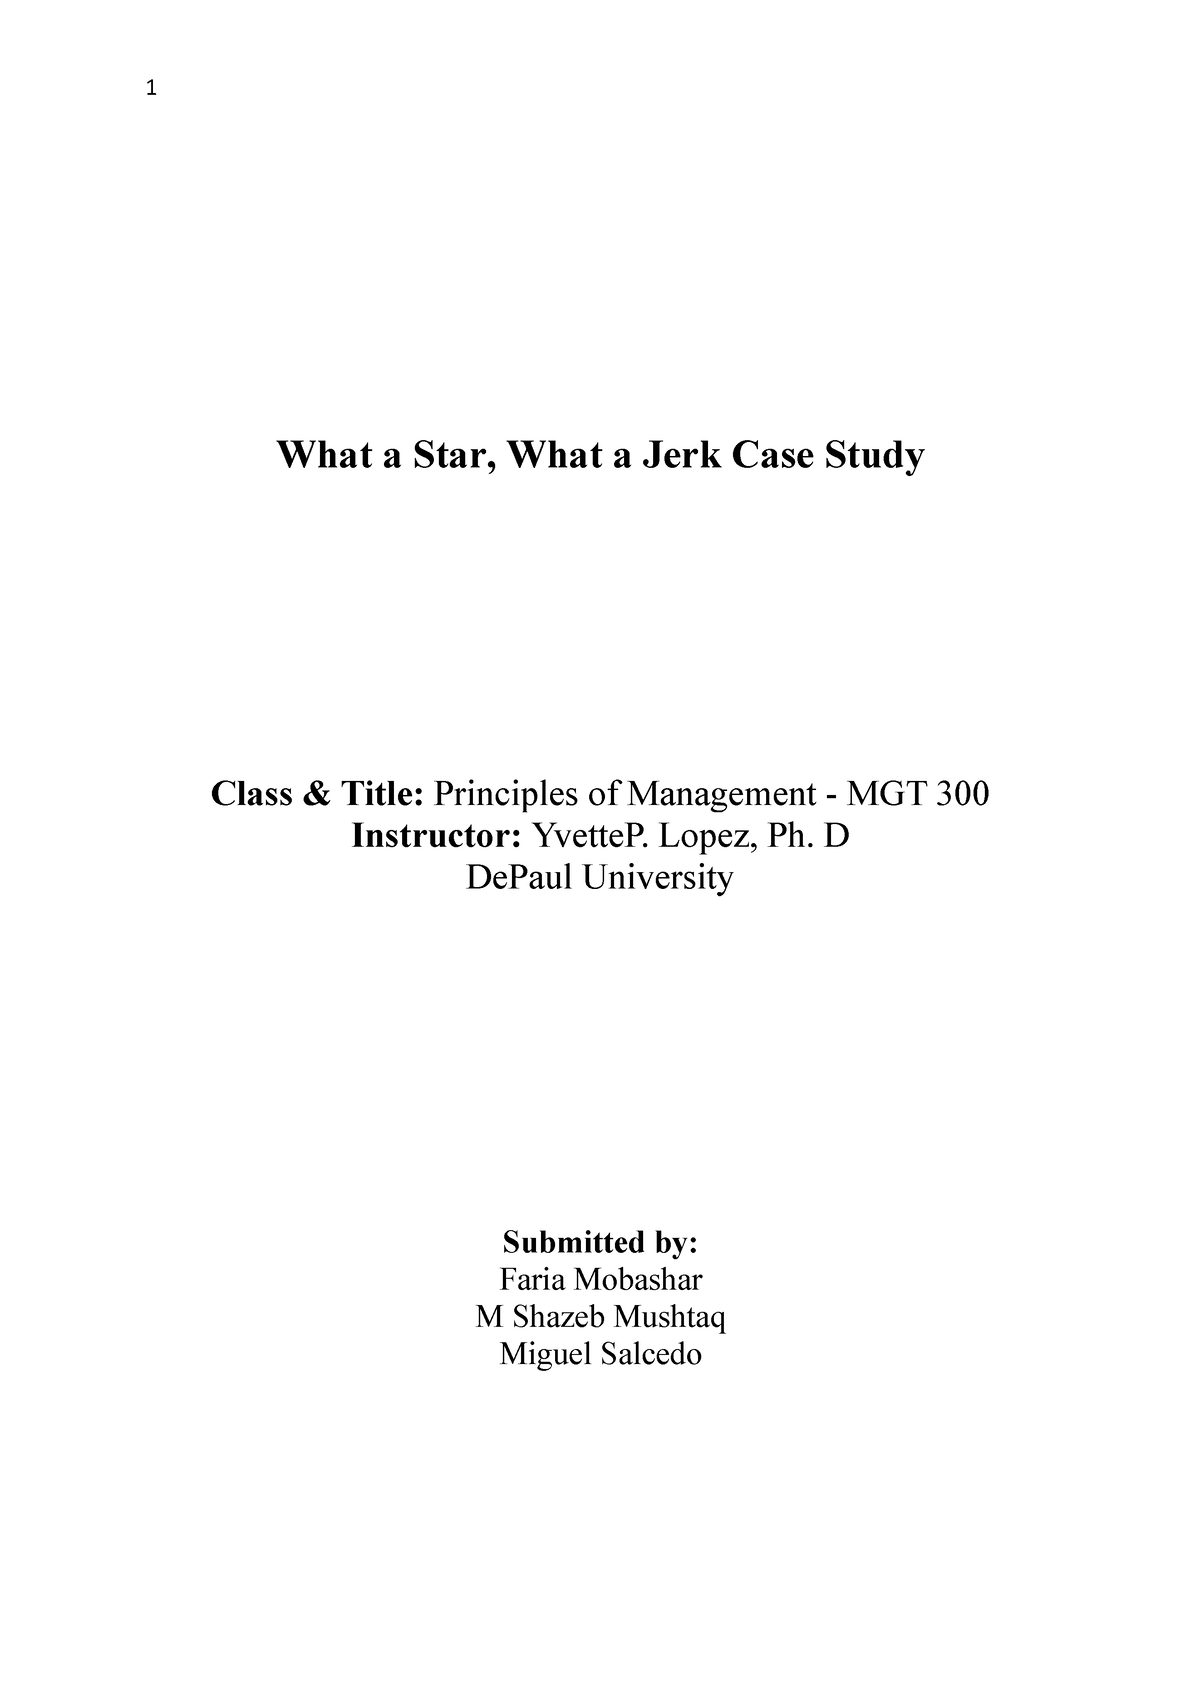 what a star what a jerk case study solution